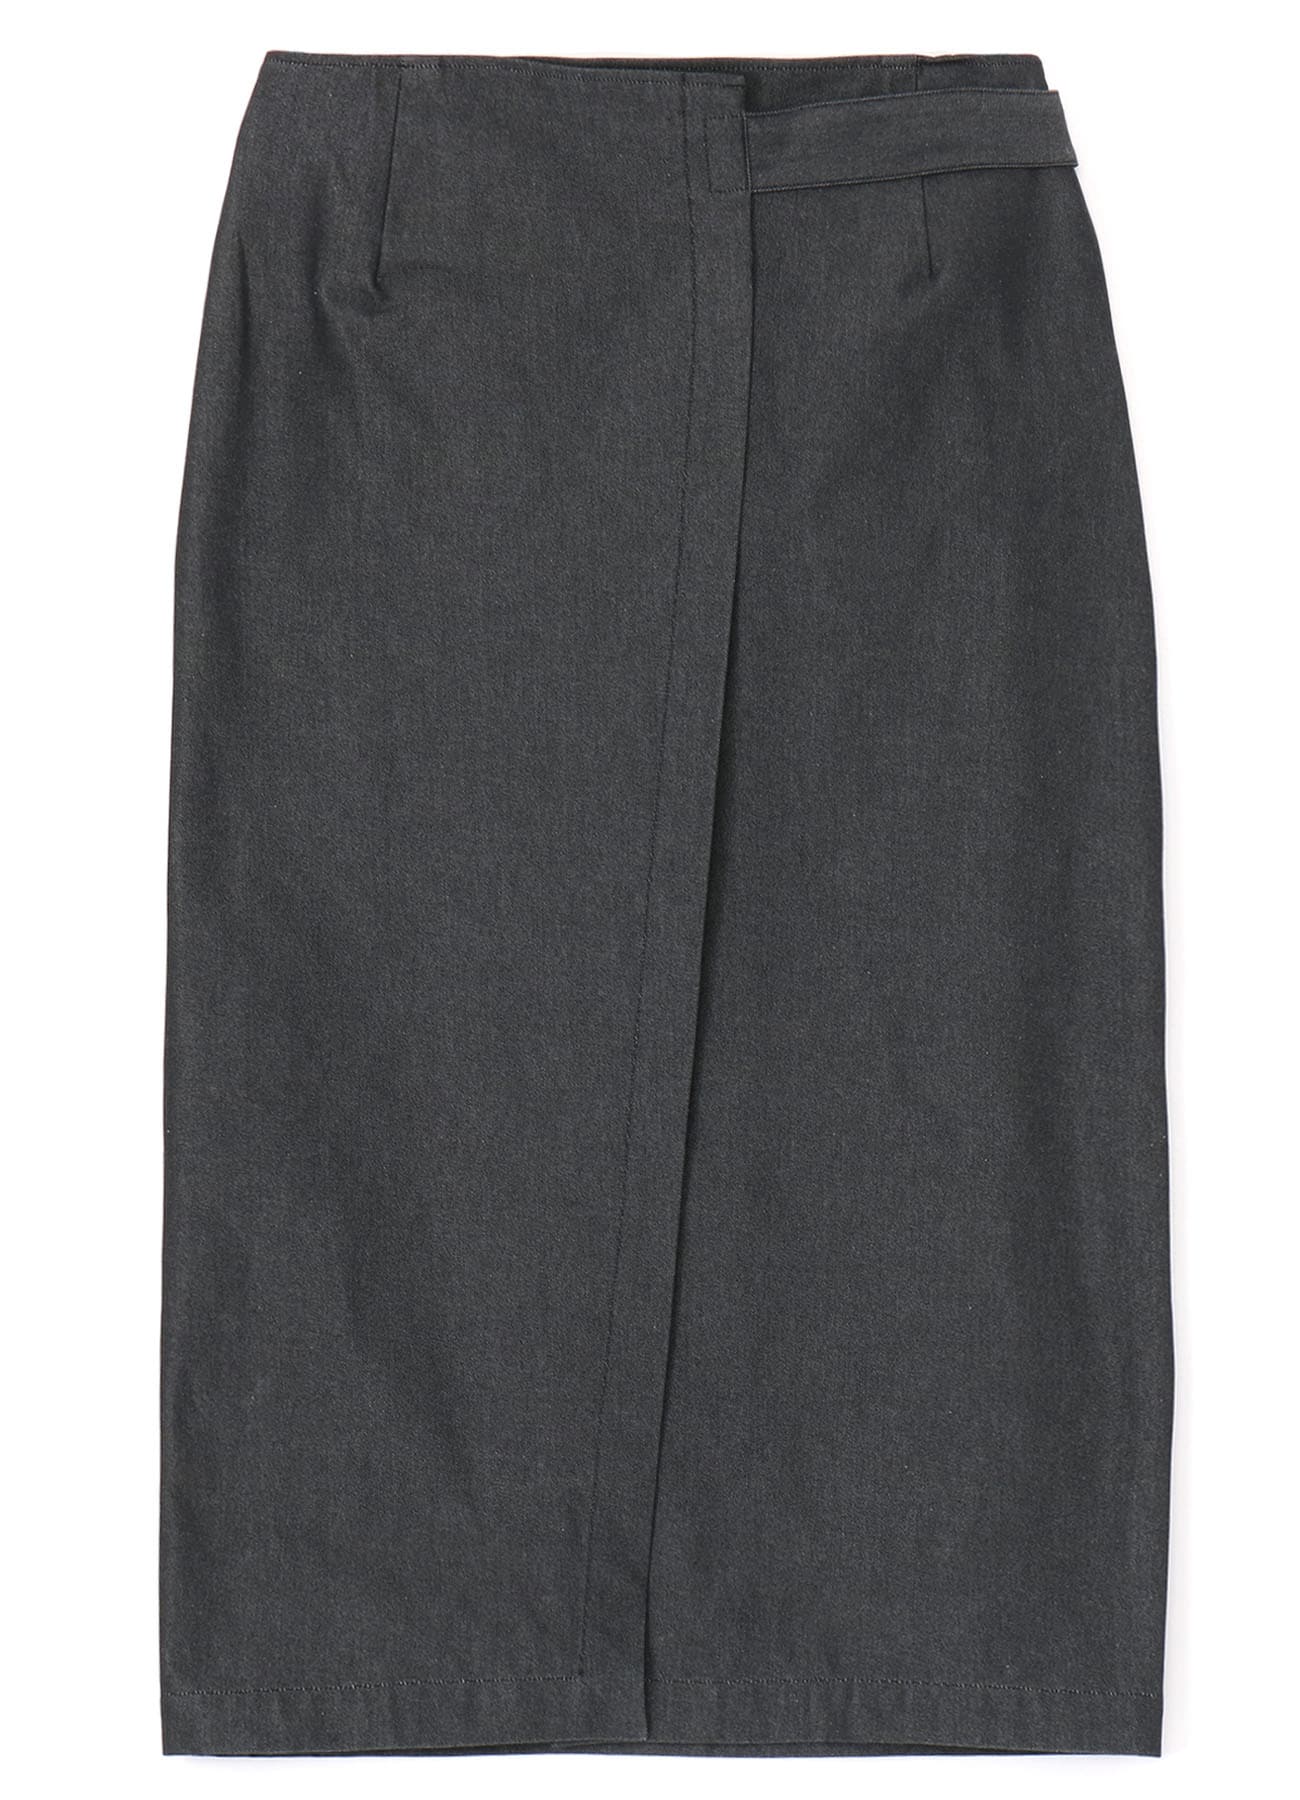 HARD TWISTED COTTON TWILL WRAP SKIRT(XS Black): Y's.｜THE SHOP 